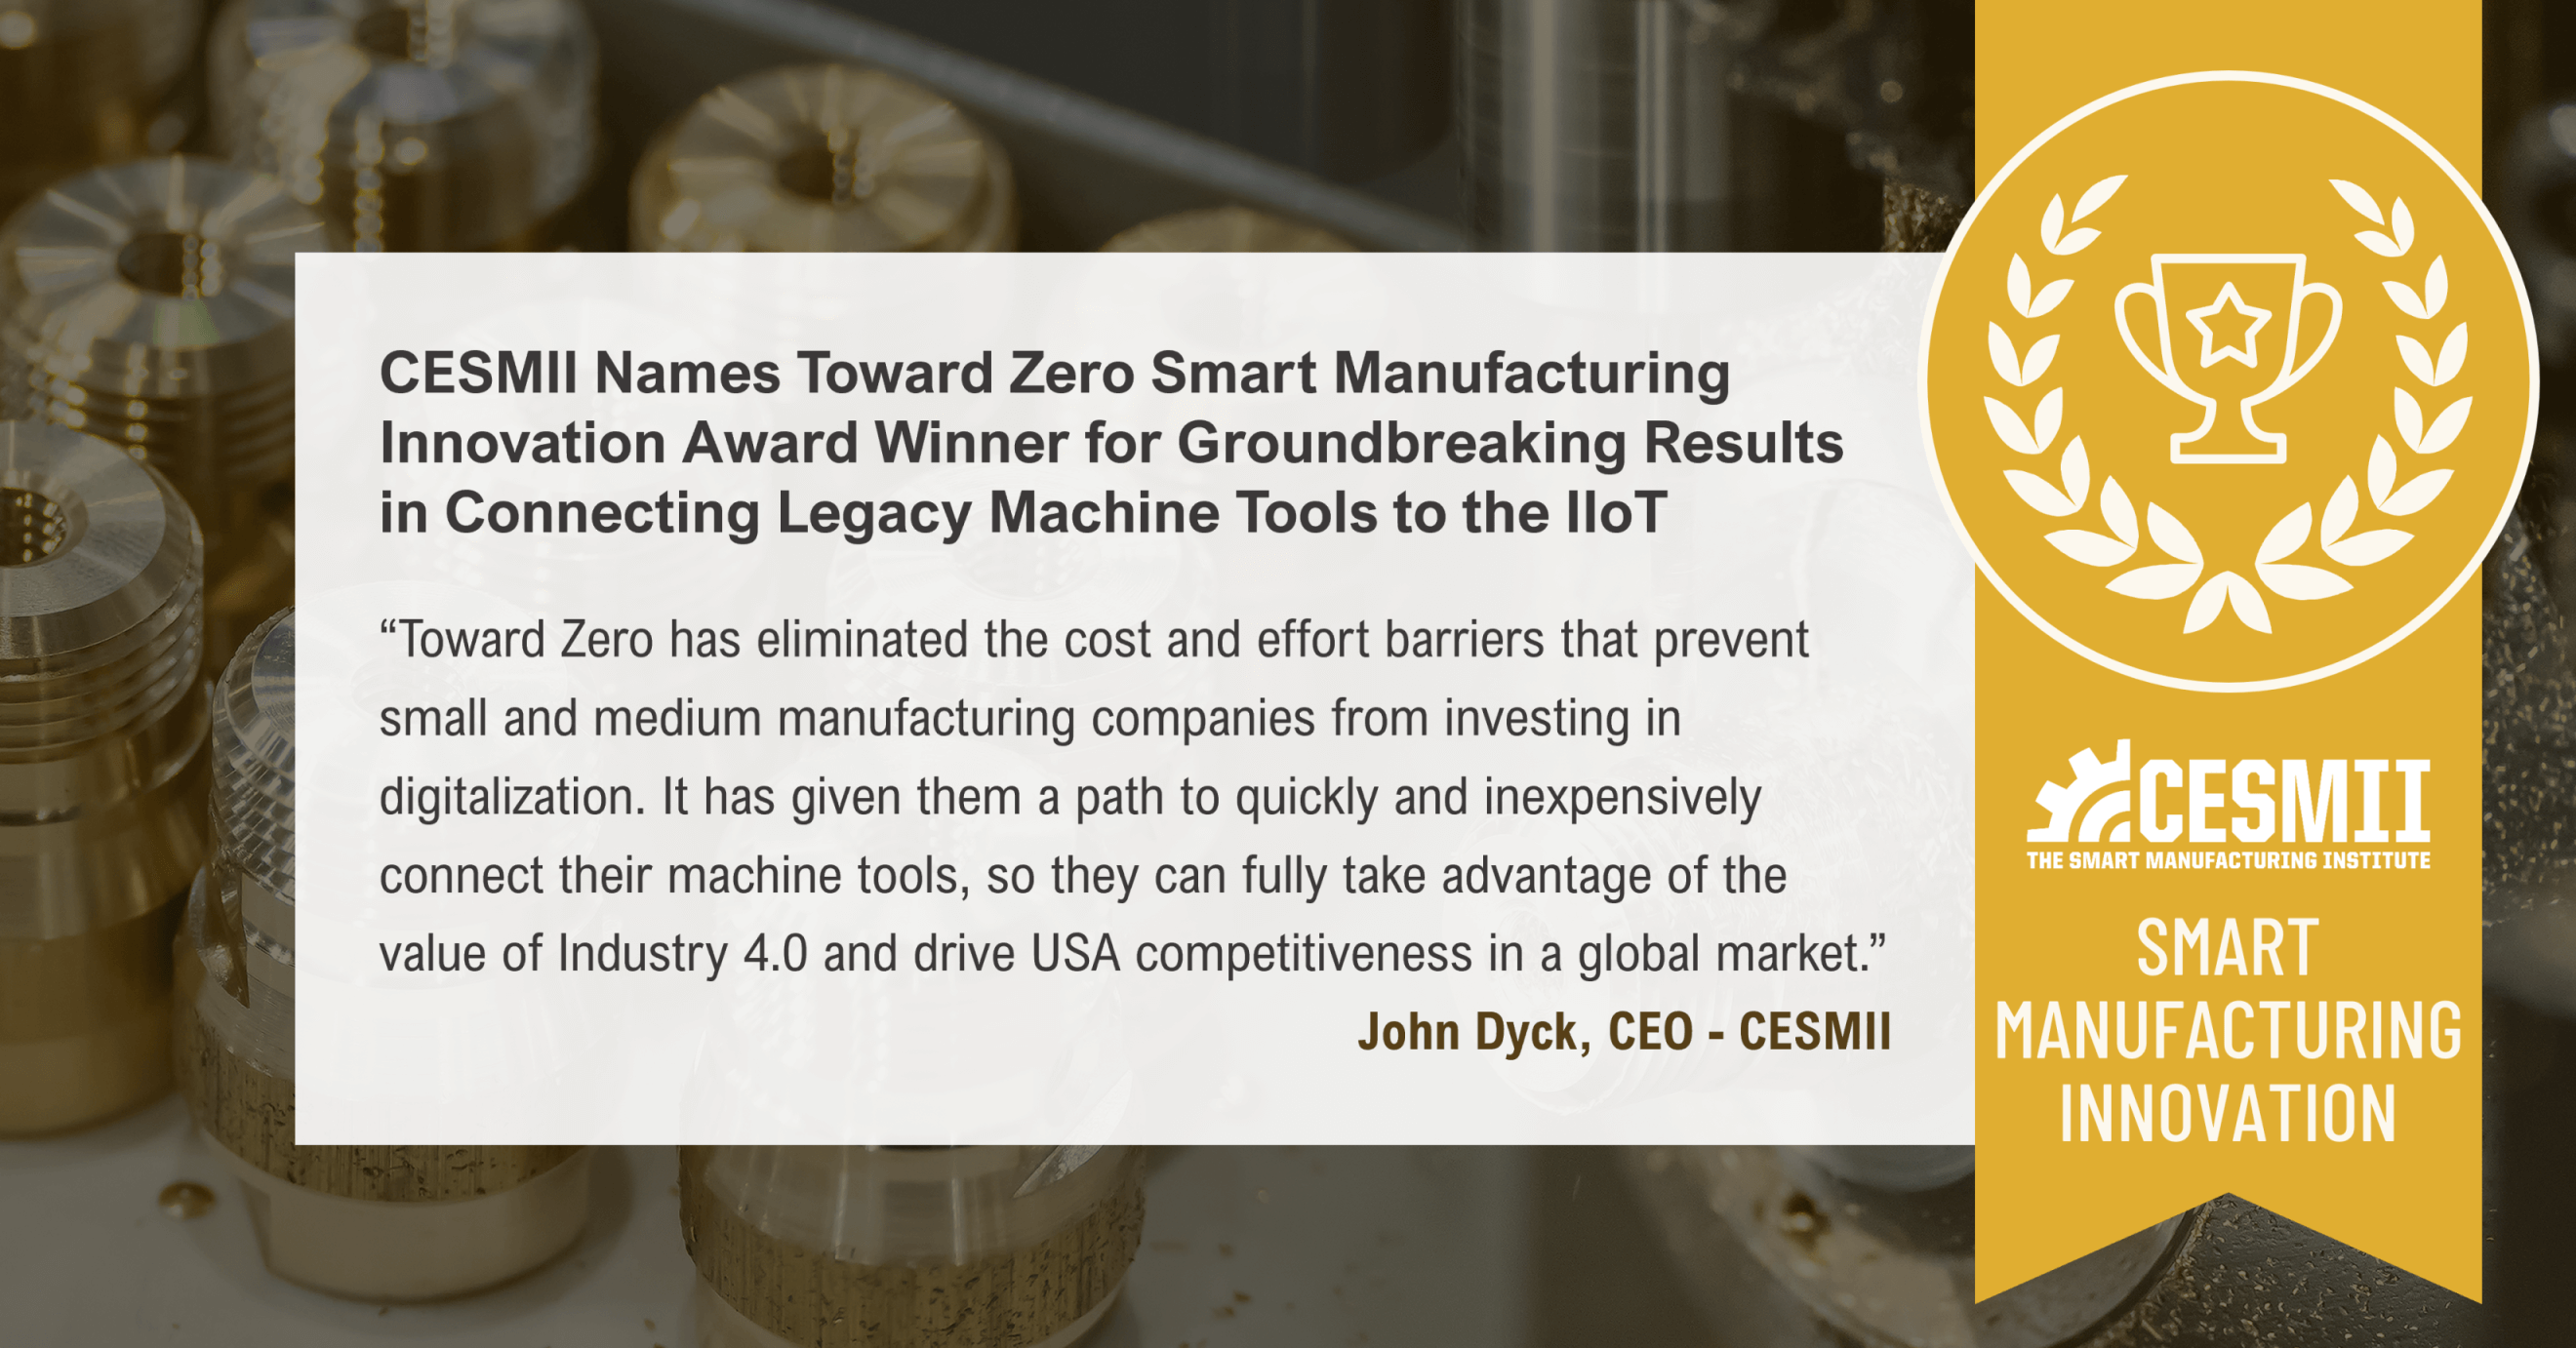 CESMII Names Toward Zero Smart Manufacturing Innovation Award Winner for Groundbreaking Results in Connecting Legacy Machine Tools to the IIoT